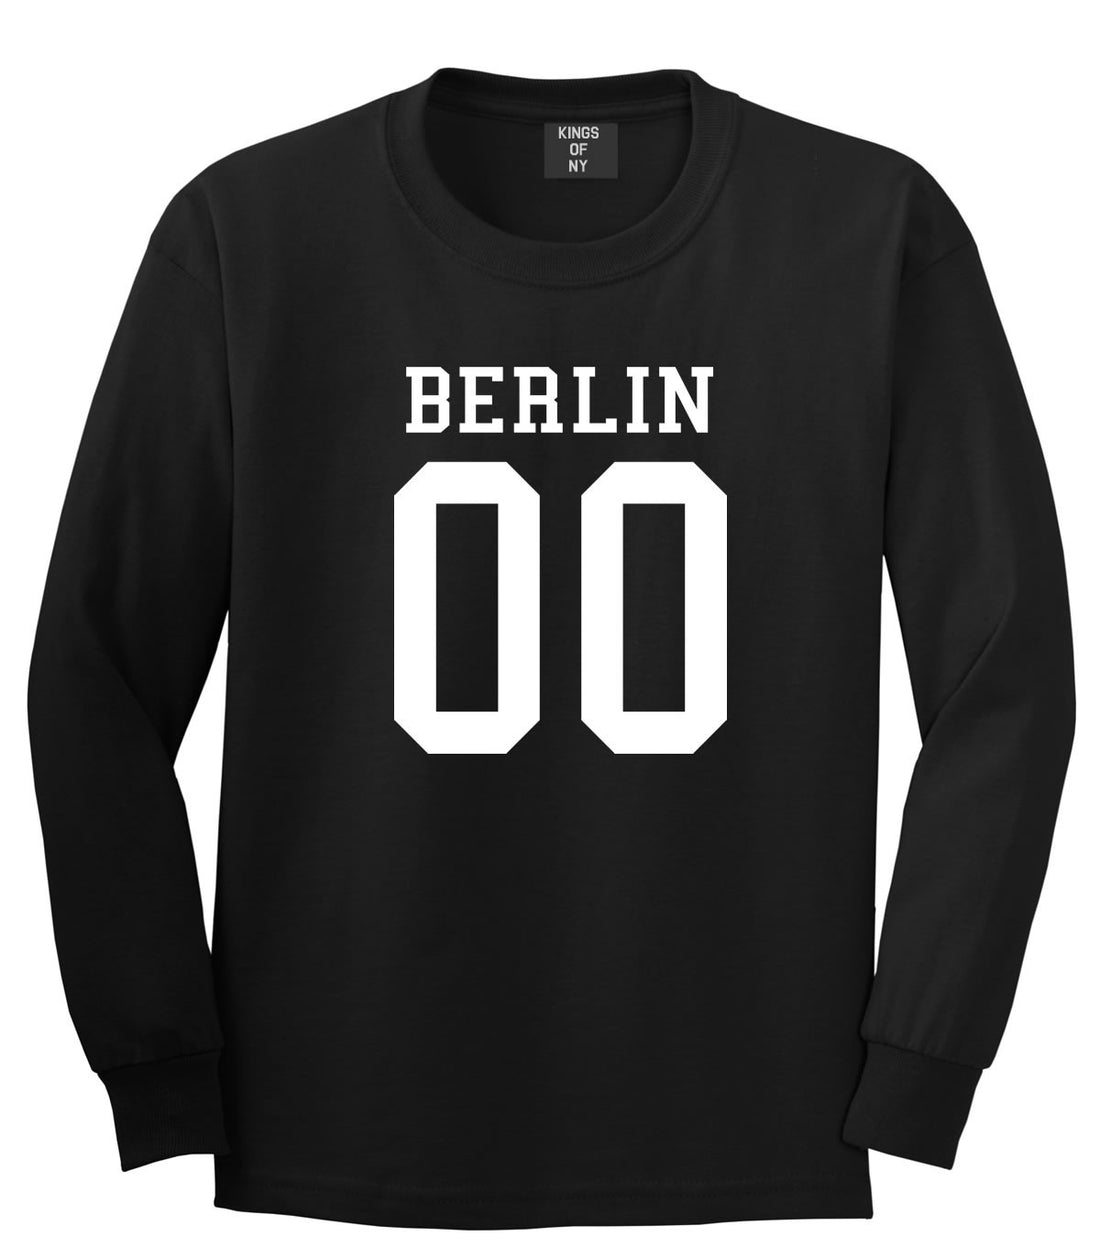 Berlin Team Jersey Germany Country Long Sleeve T-Shirt in Black By Kings Of NY